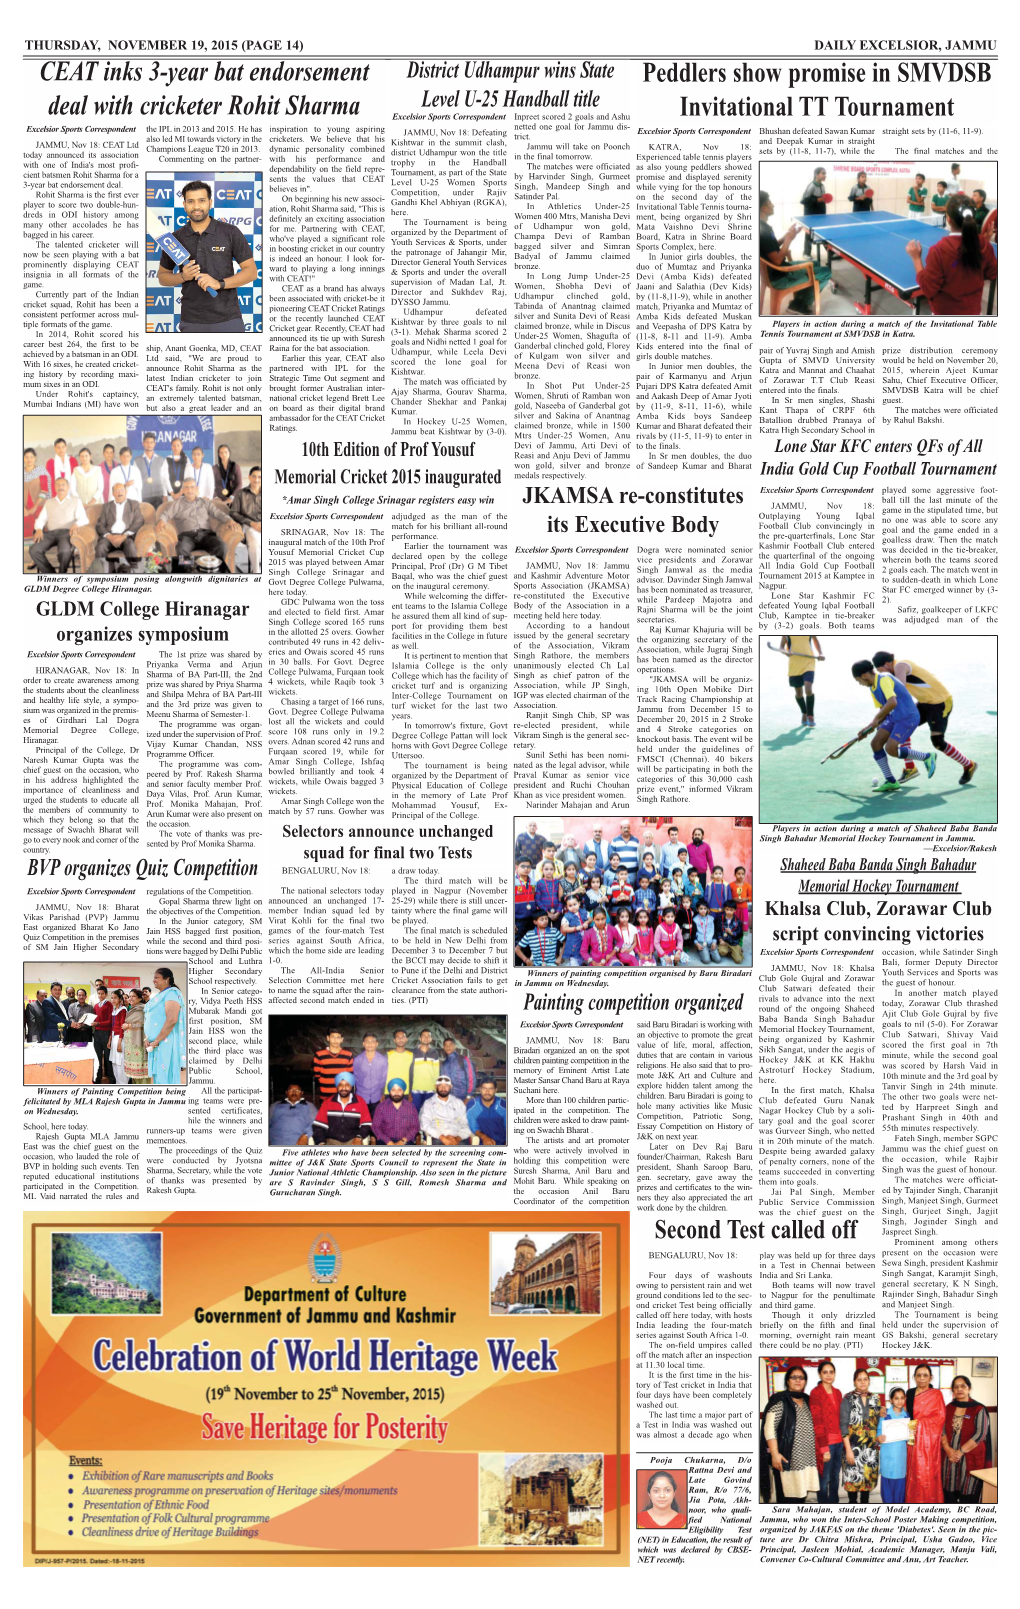 Page14 Sport.Qxd (Page 1)